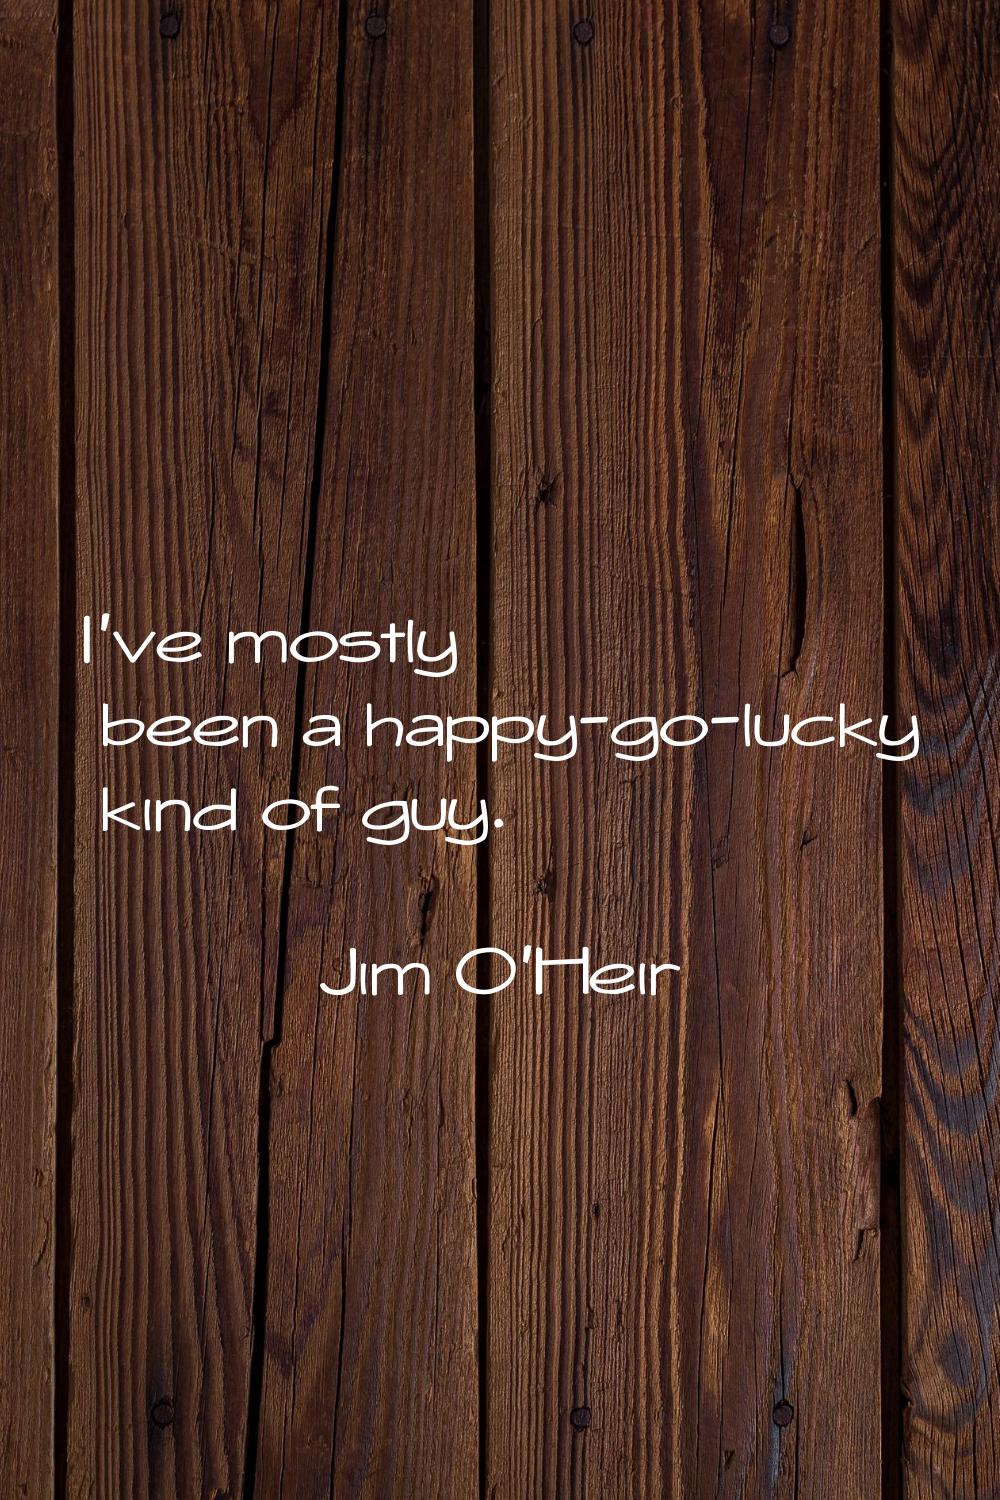 I've mostly been a happy-go-lucky kind of guy.